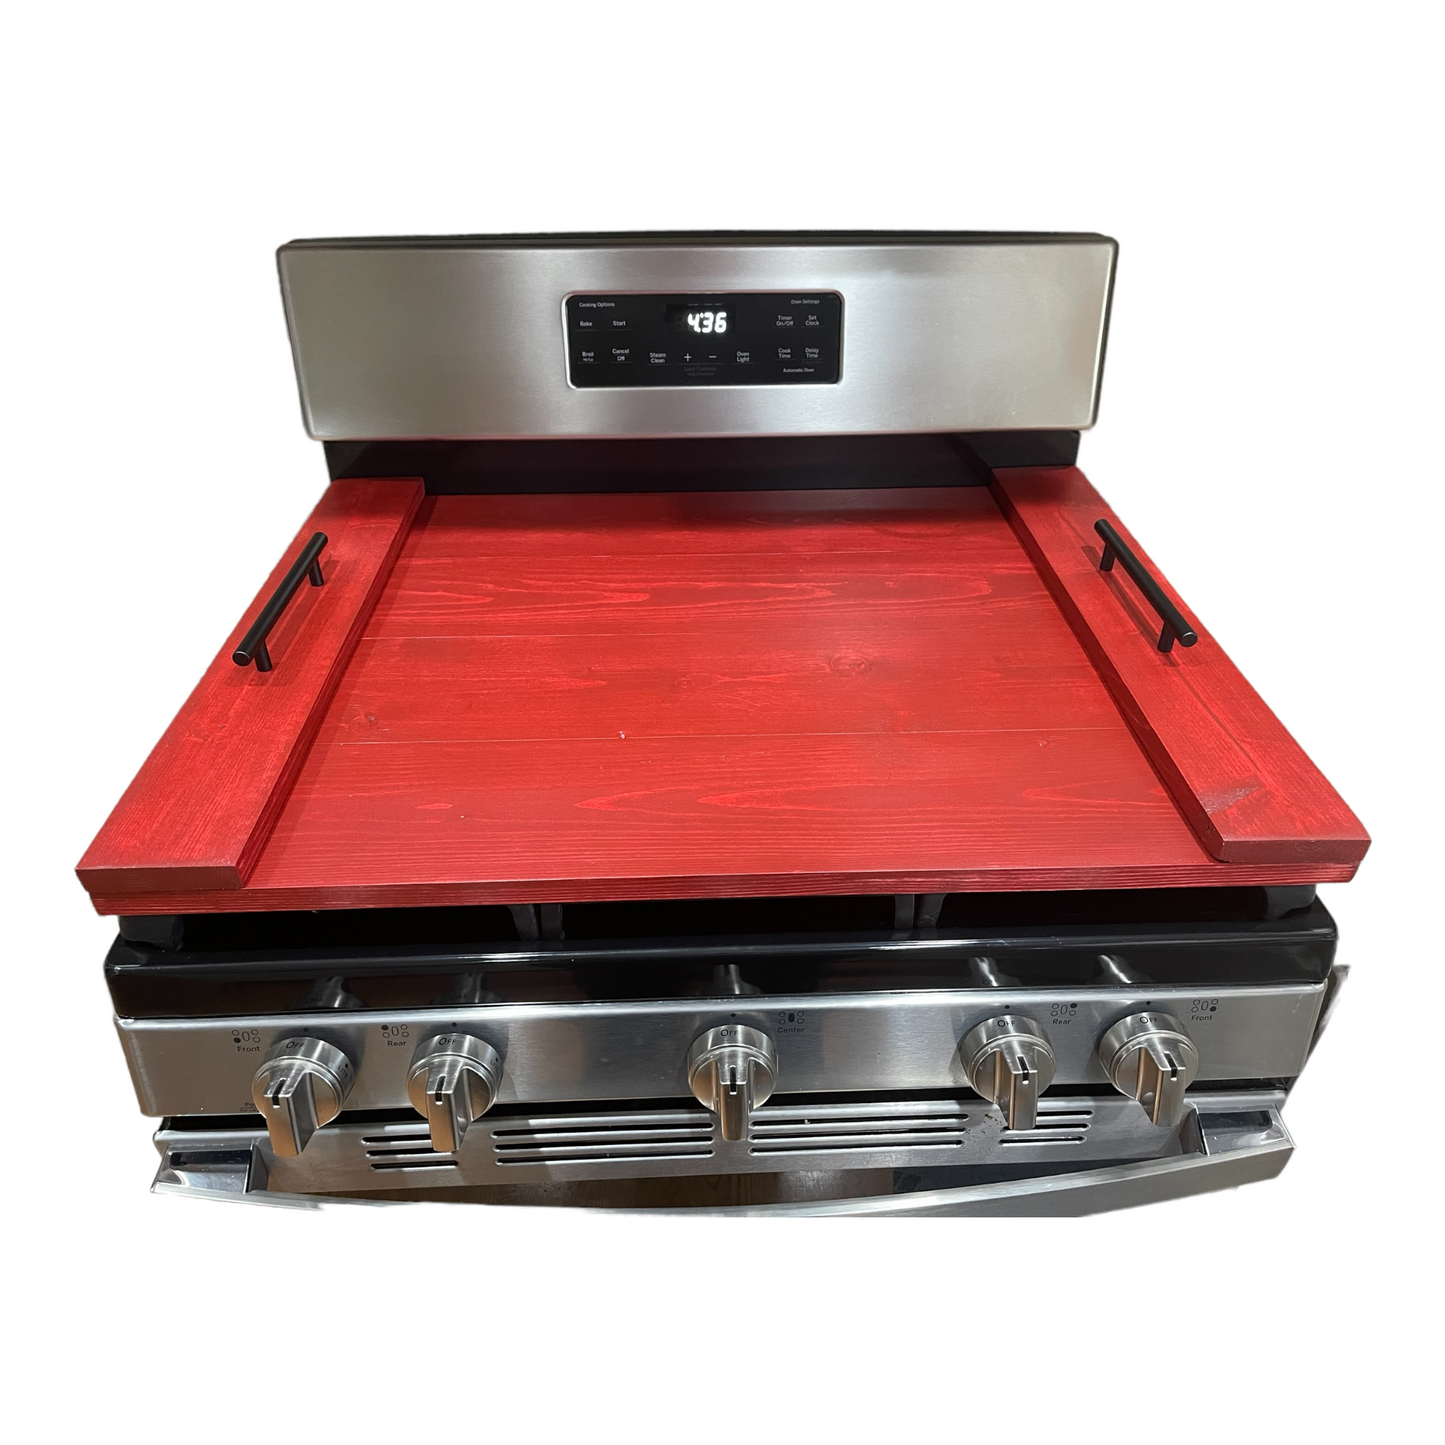 Handmade Industrial Farmhouse Stove Top Cover Noodle Board / Serving Tray Barn Red with Black Handles